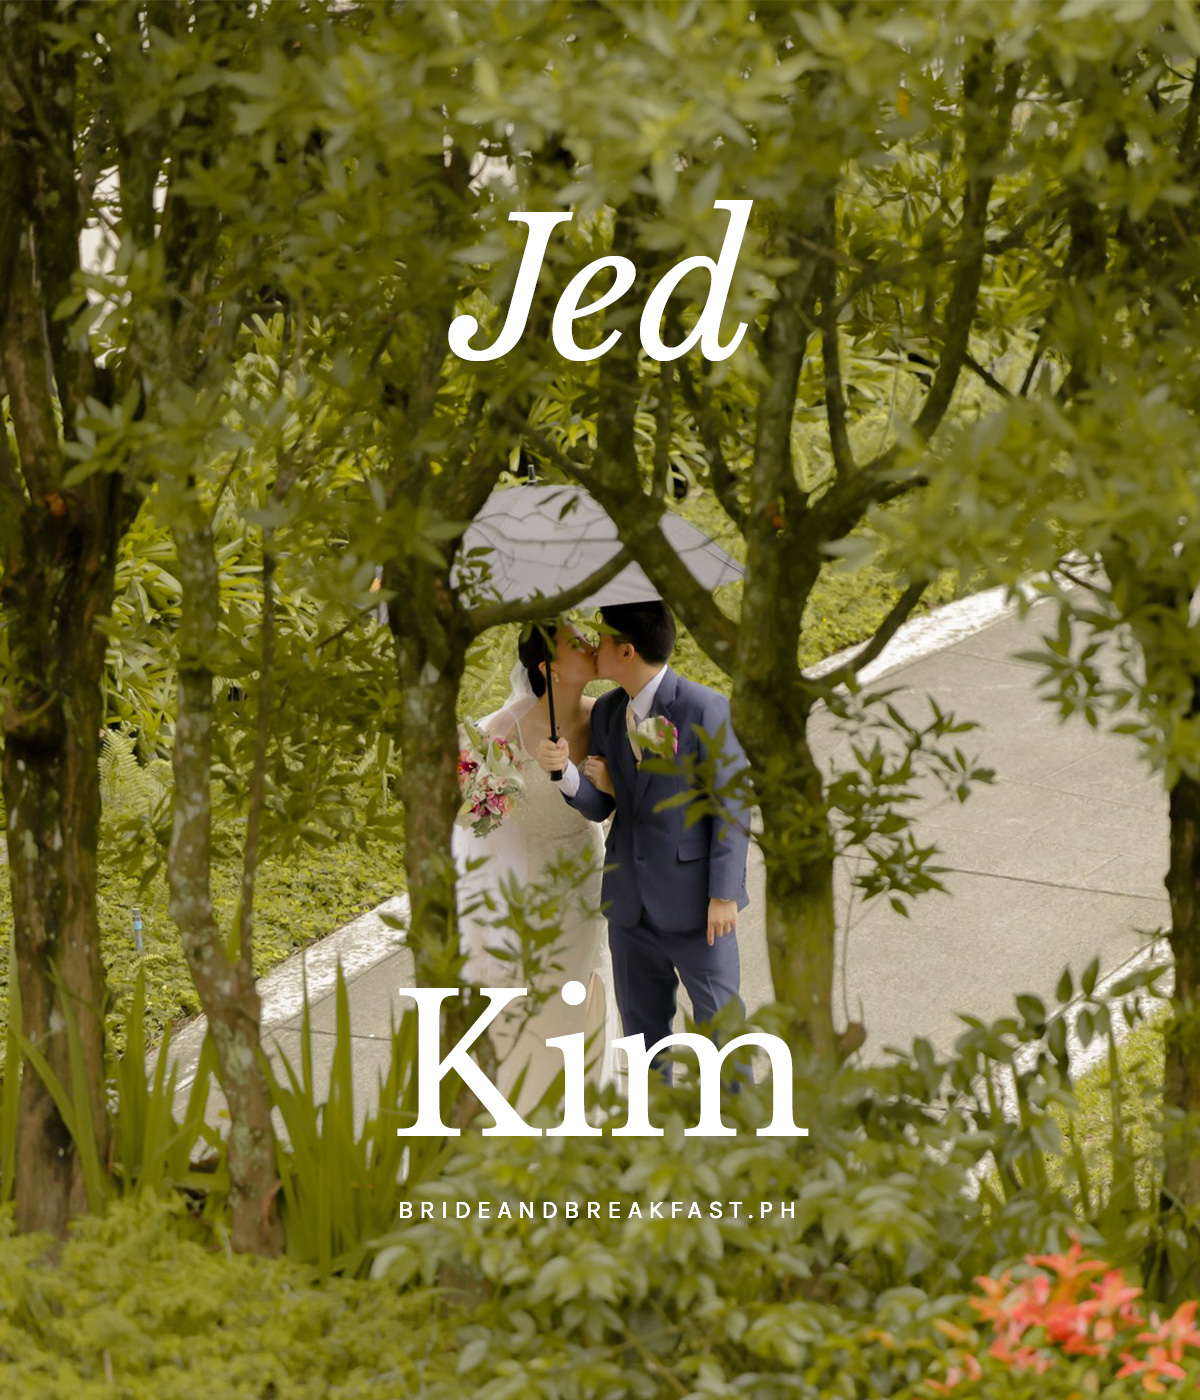 Jed and Kim